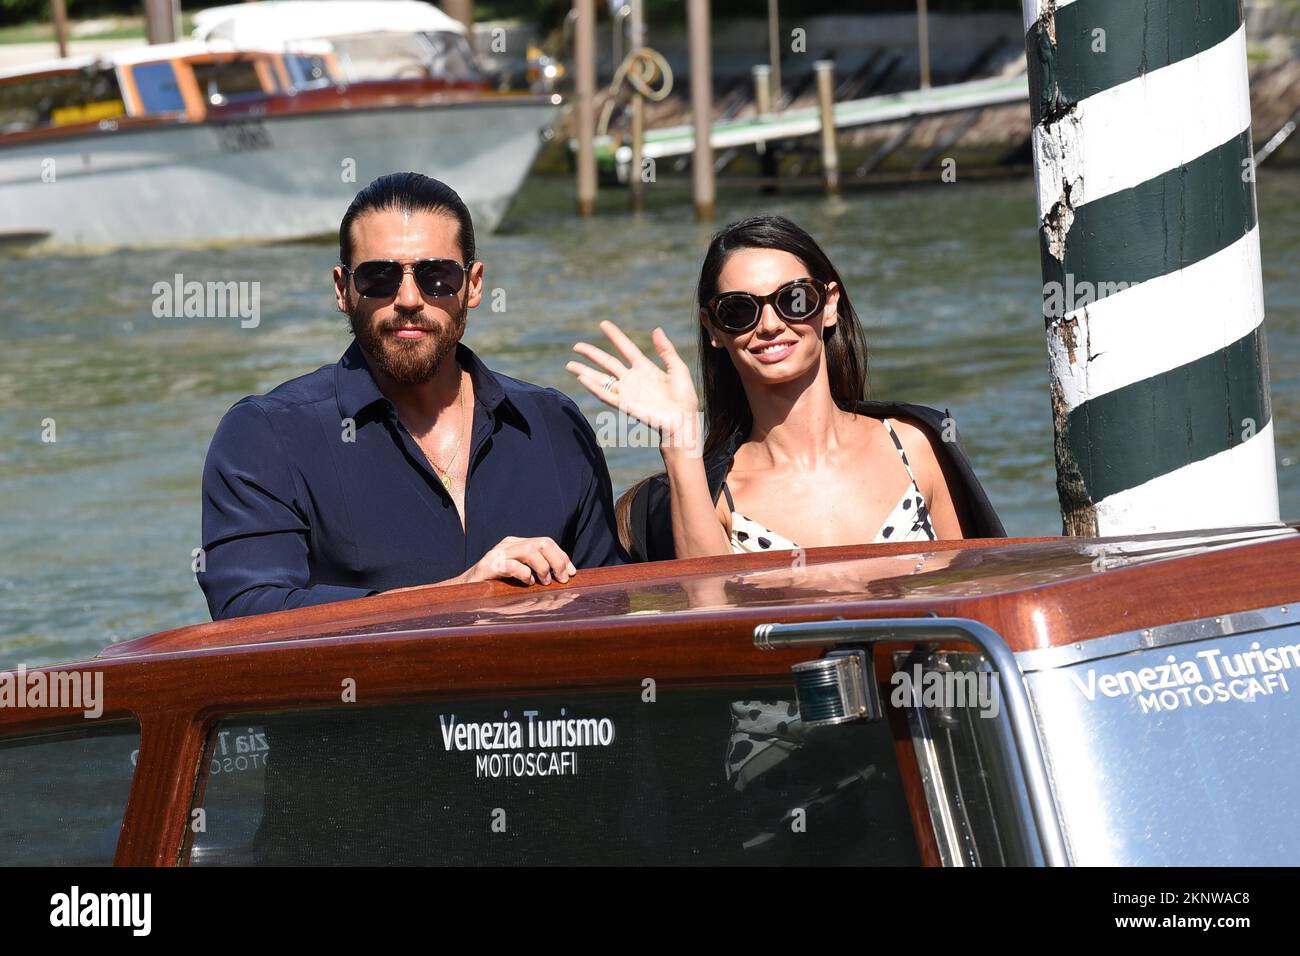 Venice 79, day 5 arrive at Darsena with Can Yaman In photo: Can Yaman, Francesca Chillemi  Where: Venezia When: 04 Sep 2022 Credit: Francesca Vieceli Stock Photo